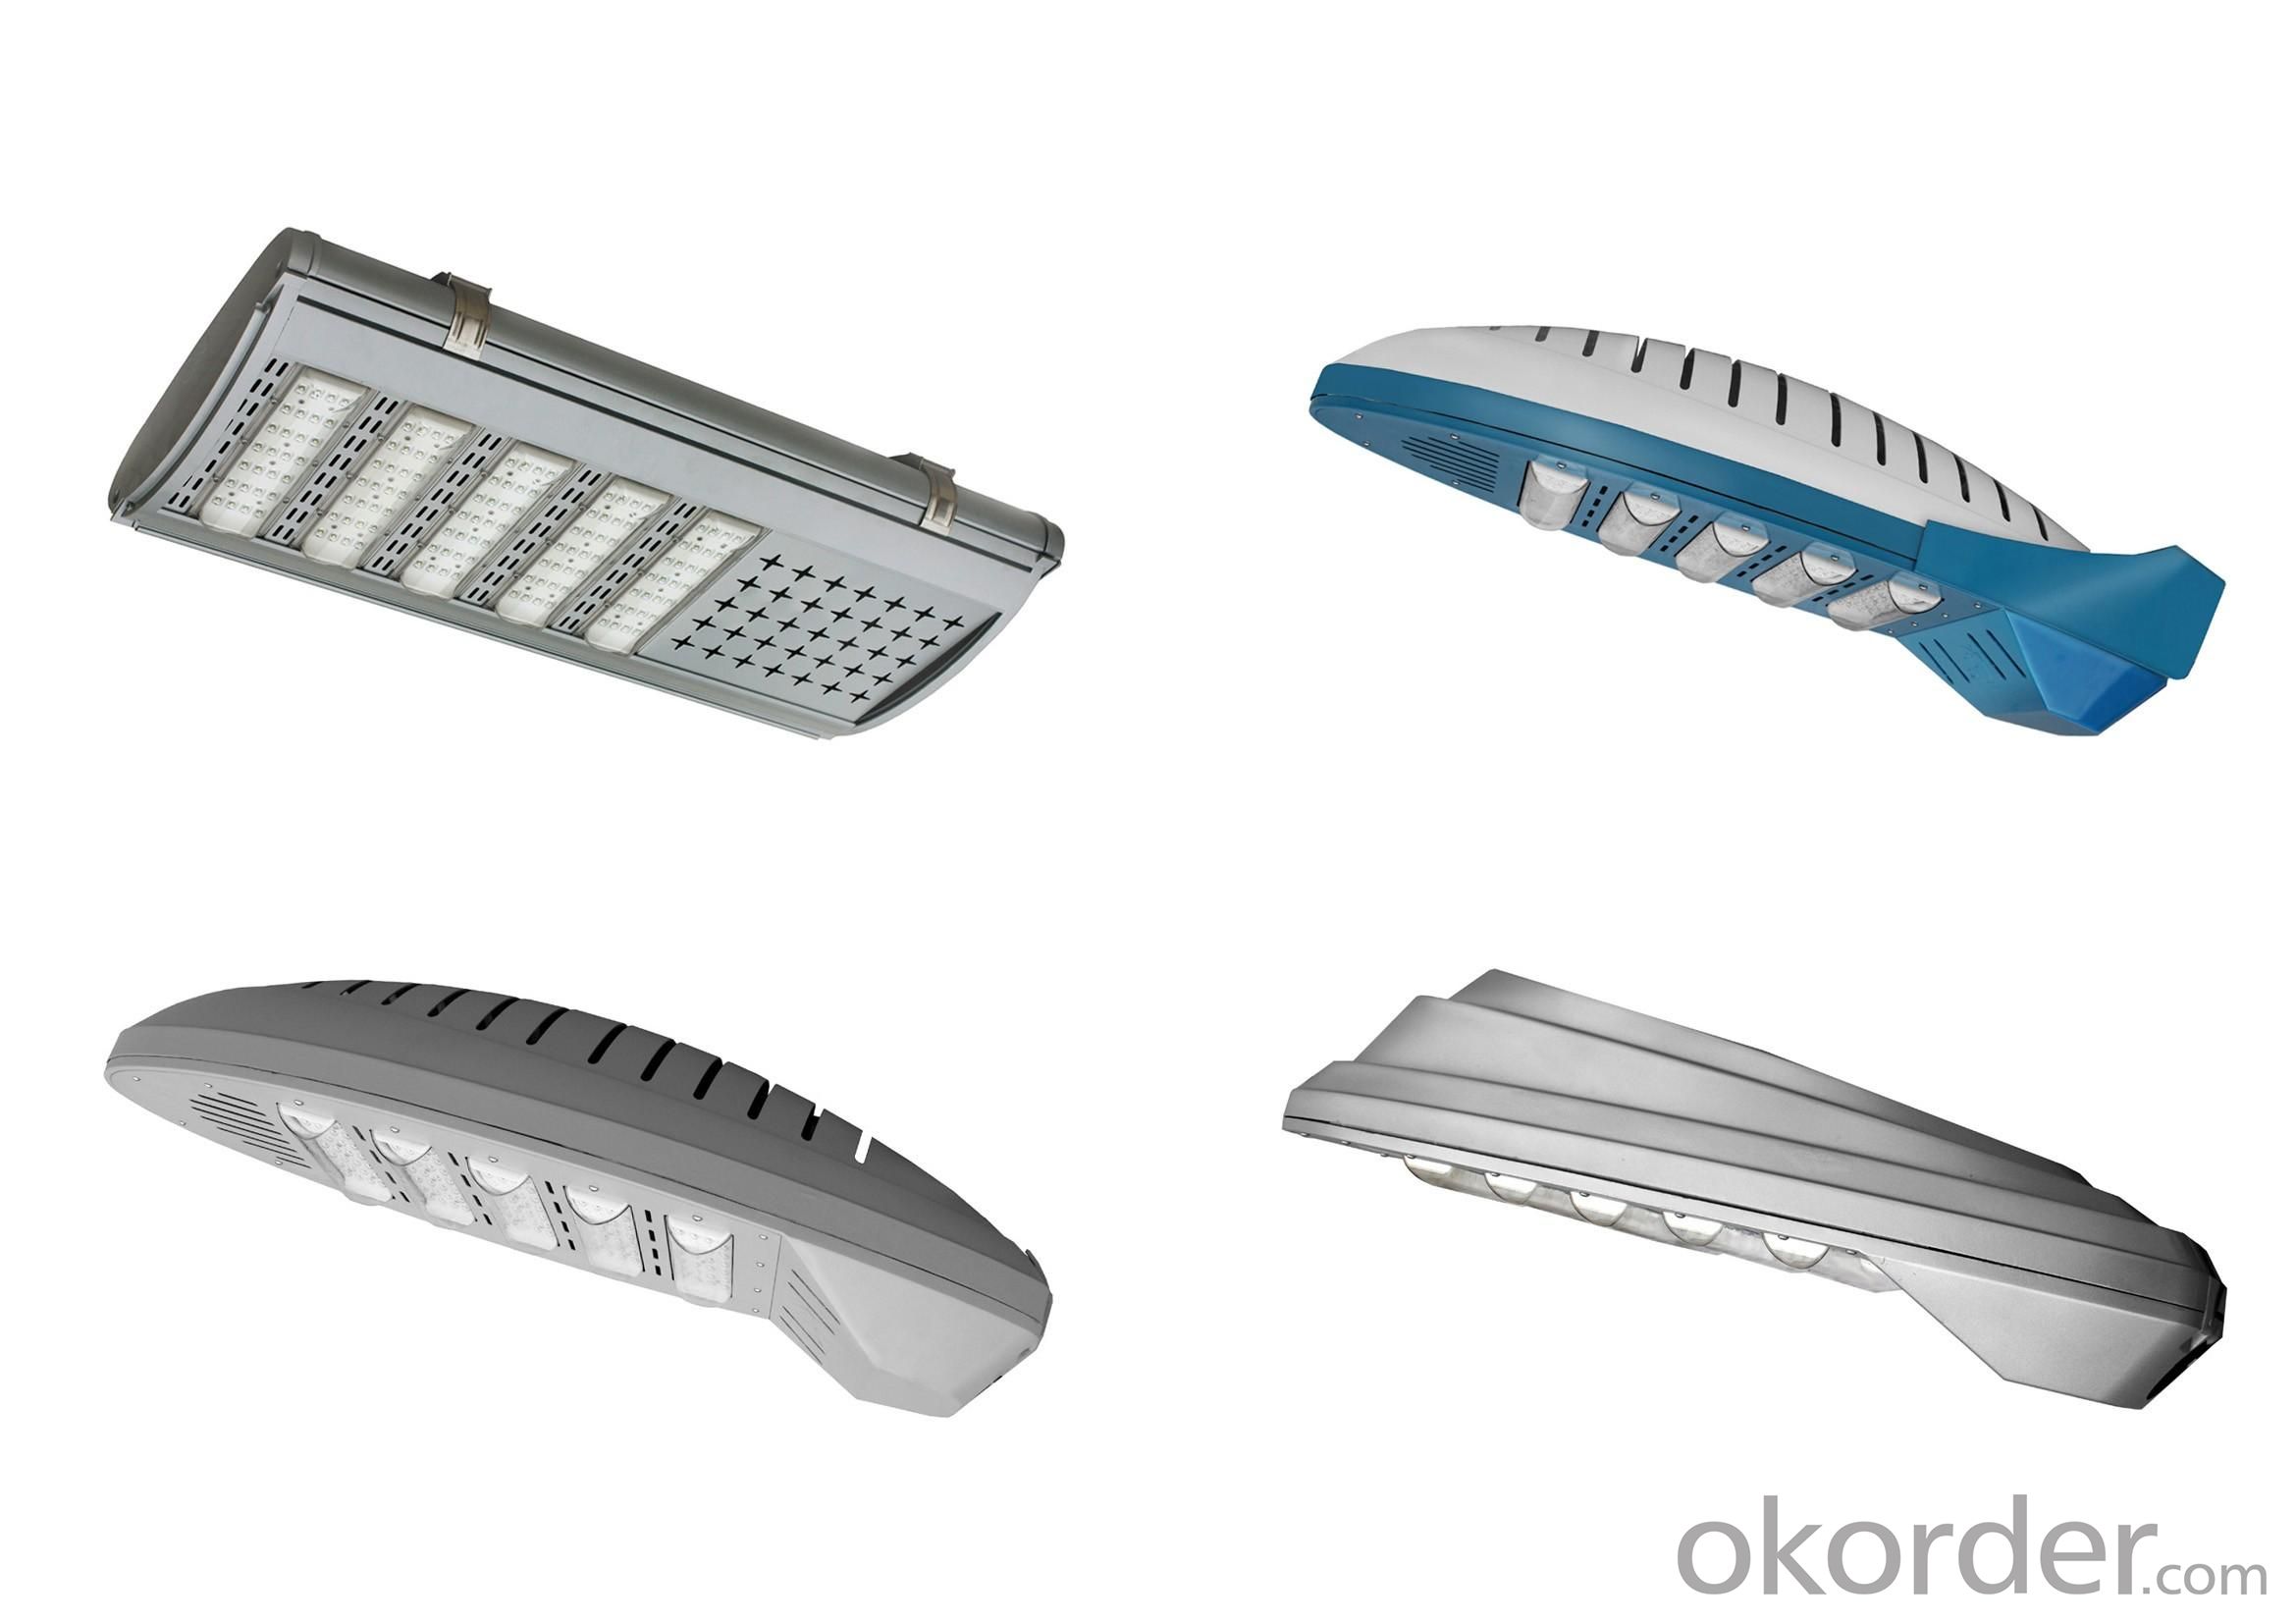 LED Street Lighting Made In China of High Quality